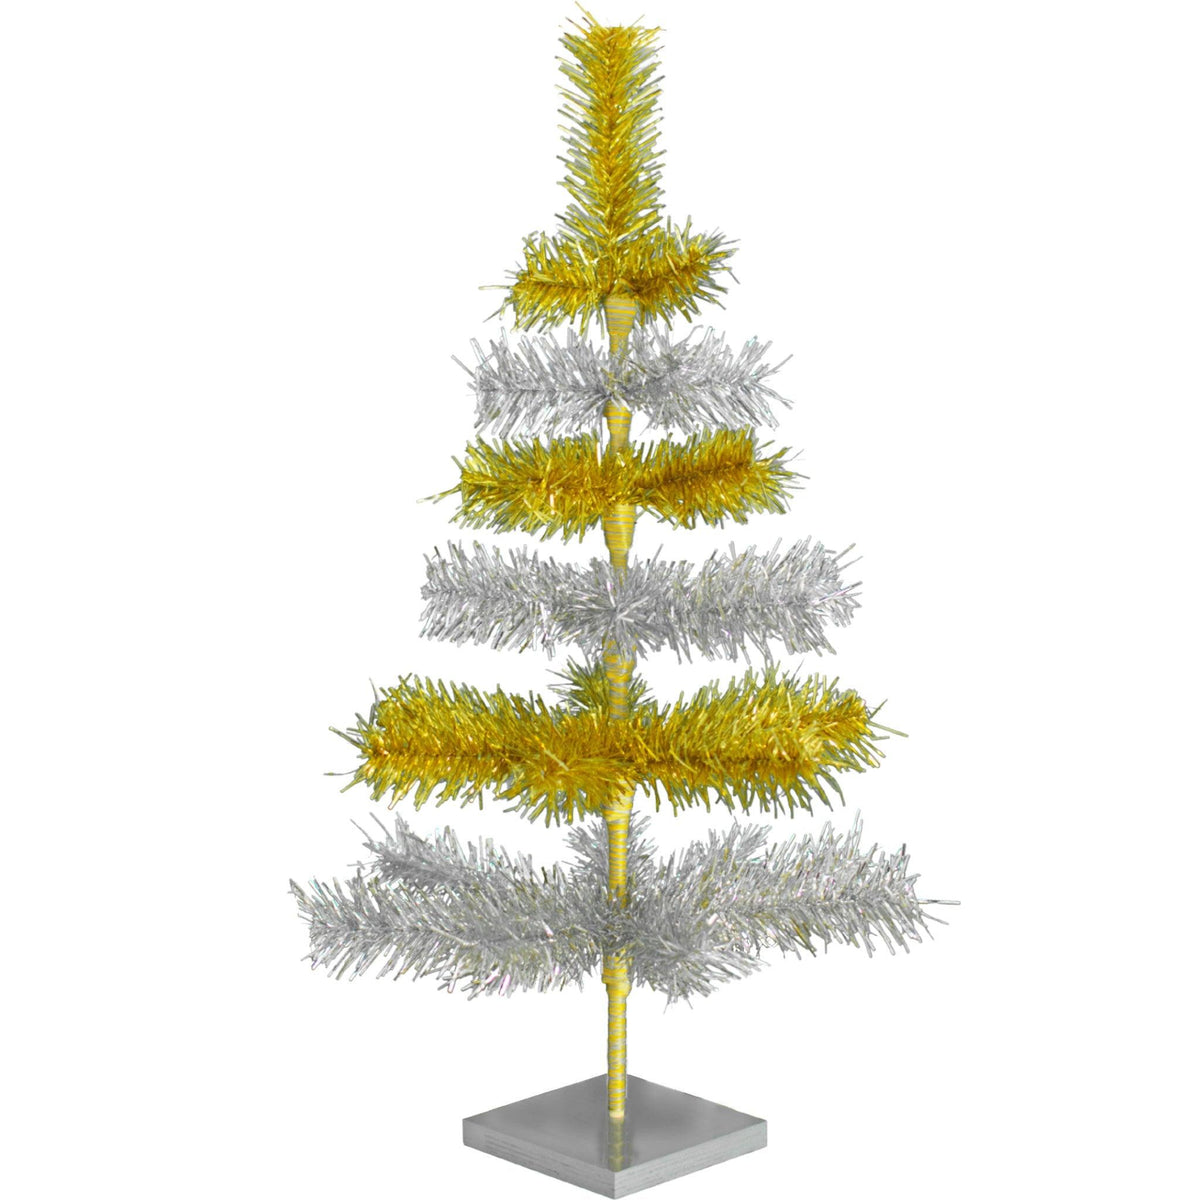 24in tall Shiny Gold and Metallic Silver Layered Tinsel Christmas Trees on sale at leedisplay.com